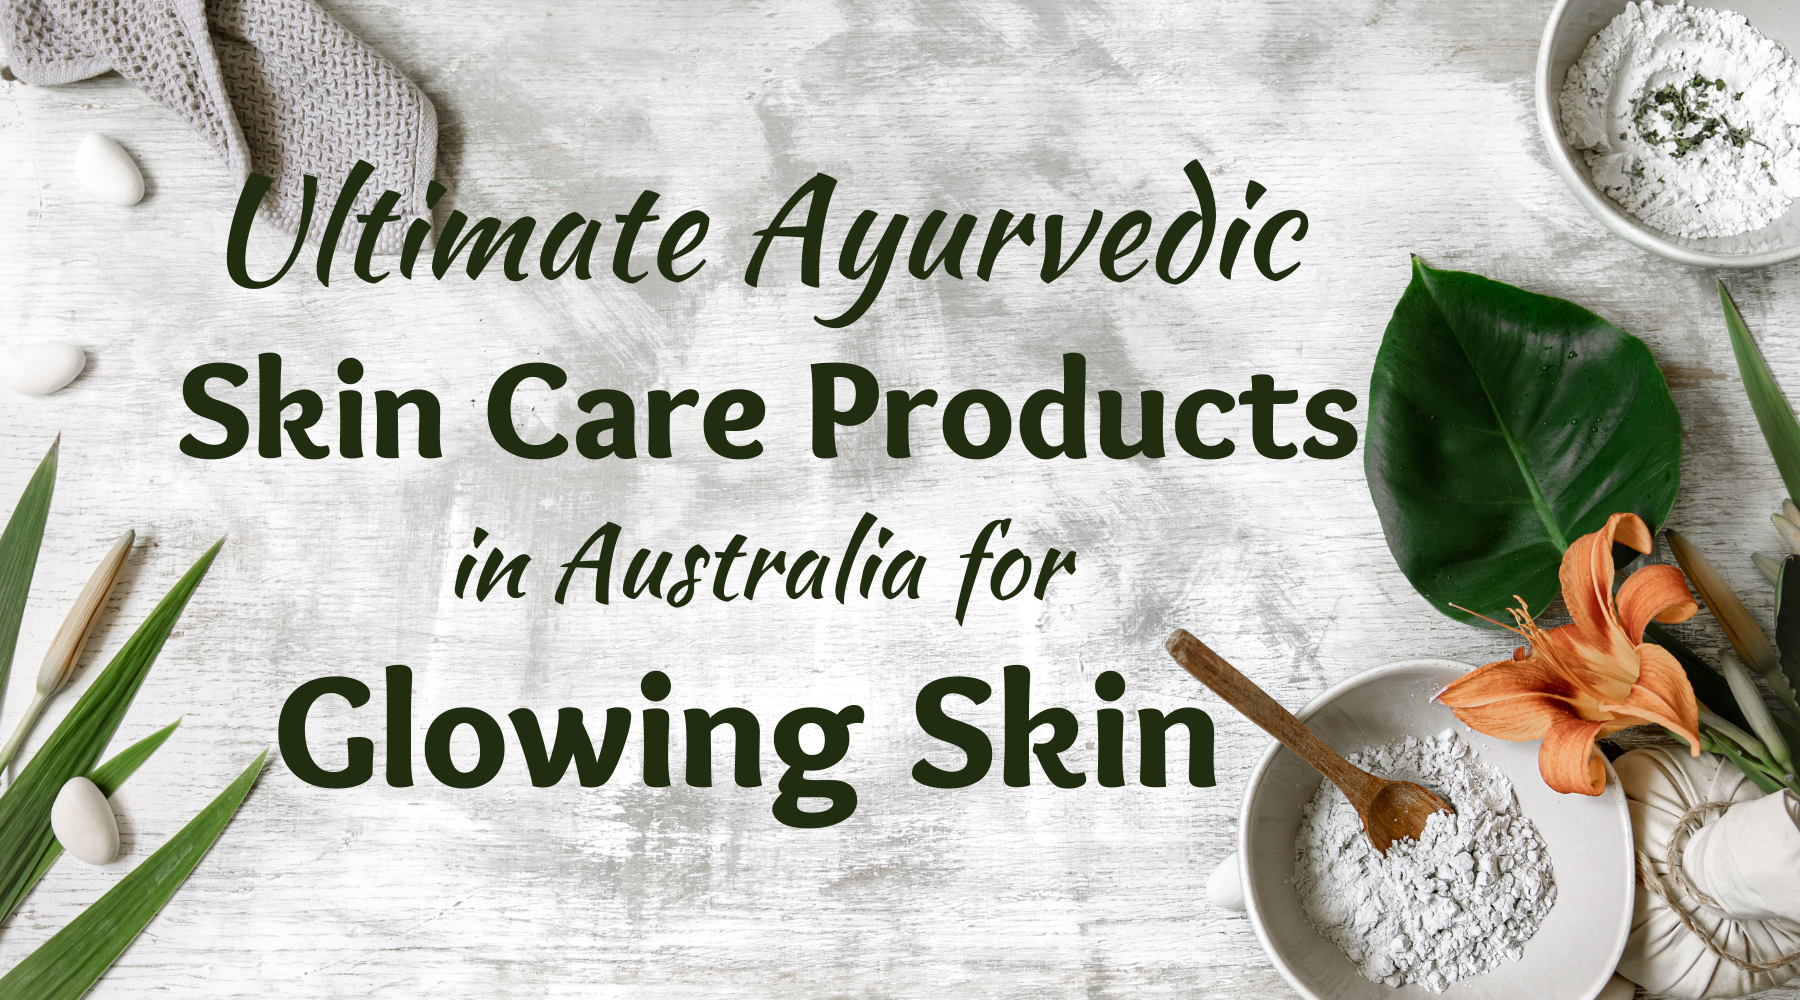 Ultimate Ayurvedic skincare products in Australia for Glowing Skin